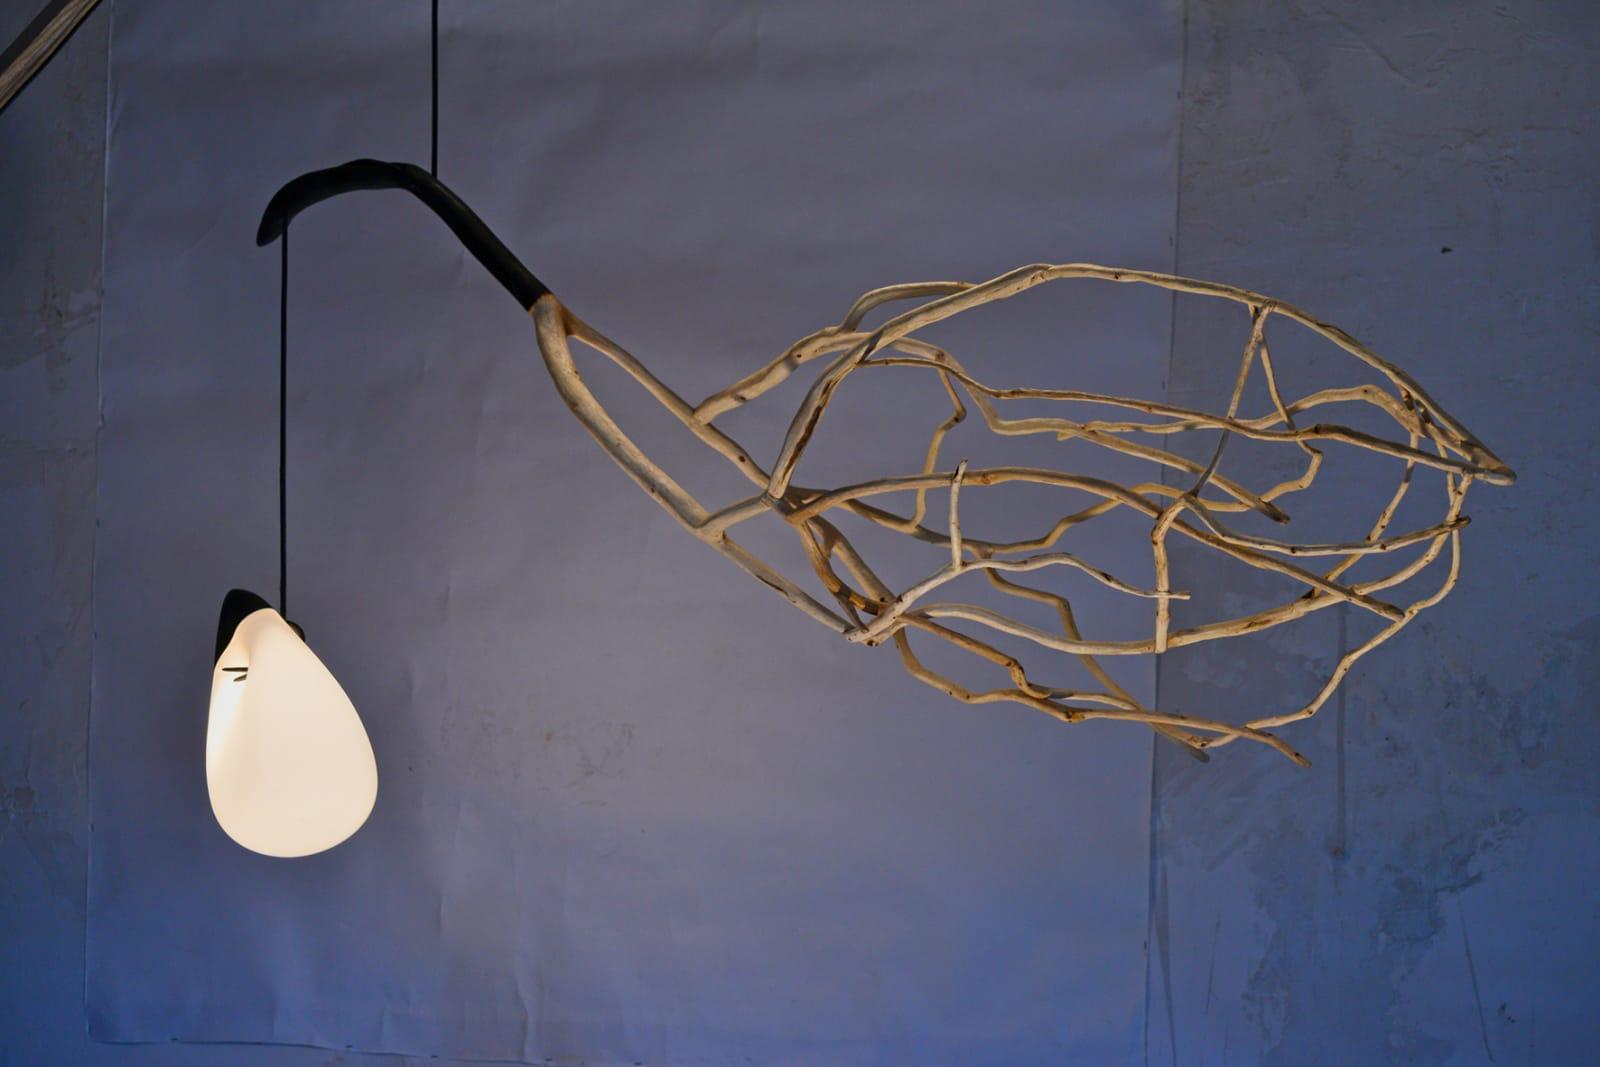 Icarus Sculpted Lighting by Jerome Pereira 
Materials: Oak Tree, blown glass
Dimensions: L 180 x L 60 x H 40 cm
The width of the wing is 40cm.
The position of the glass globe is adjustable
Bulbs: E12 socket. Dimmable with dimmable bulbs.